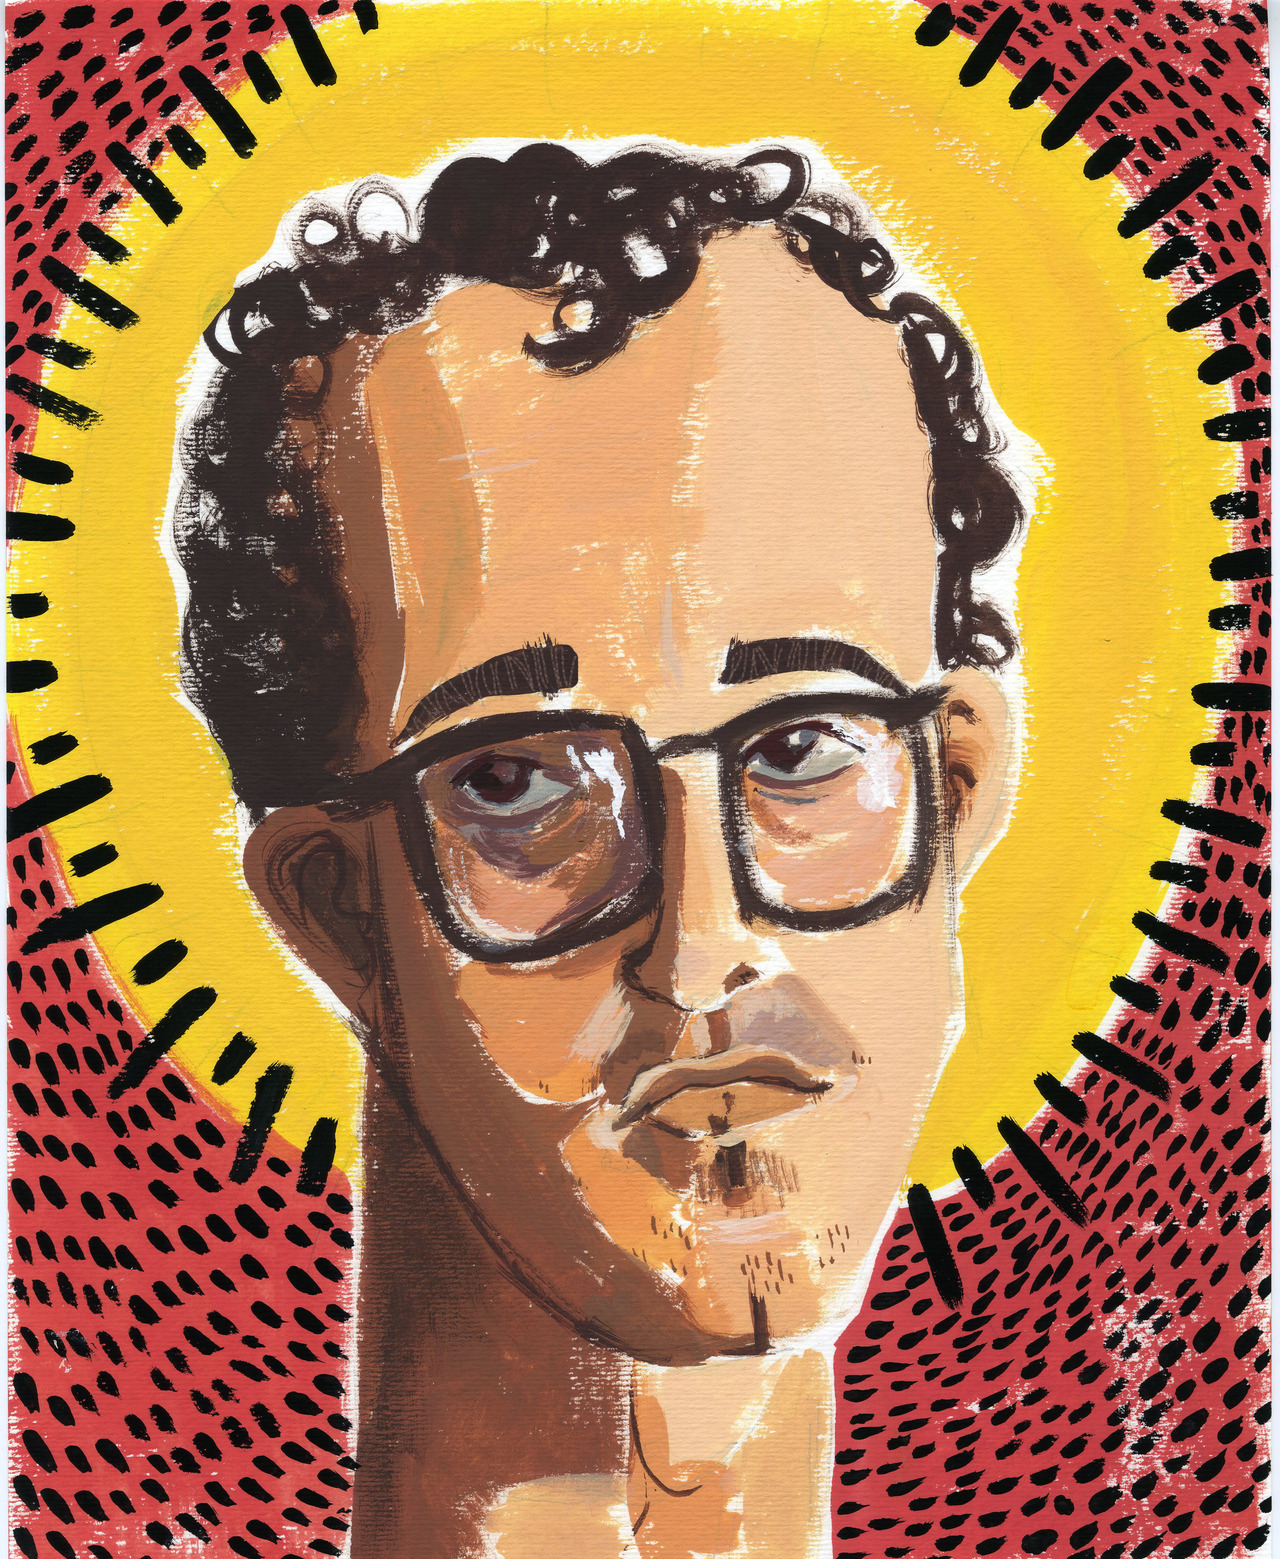 Challenge 24: Dinner Guests– Keith Haring
In college, I wrote a paper on Keith Haring’s spiritual, yet non-religious, work, and really felt, for the first time, that I found a person who had the same beliefs and viewpoint towards life. Haring was a...